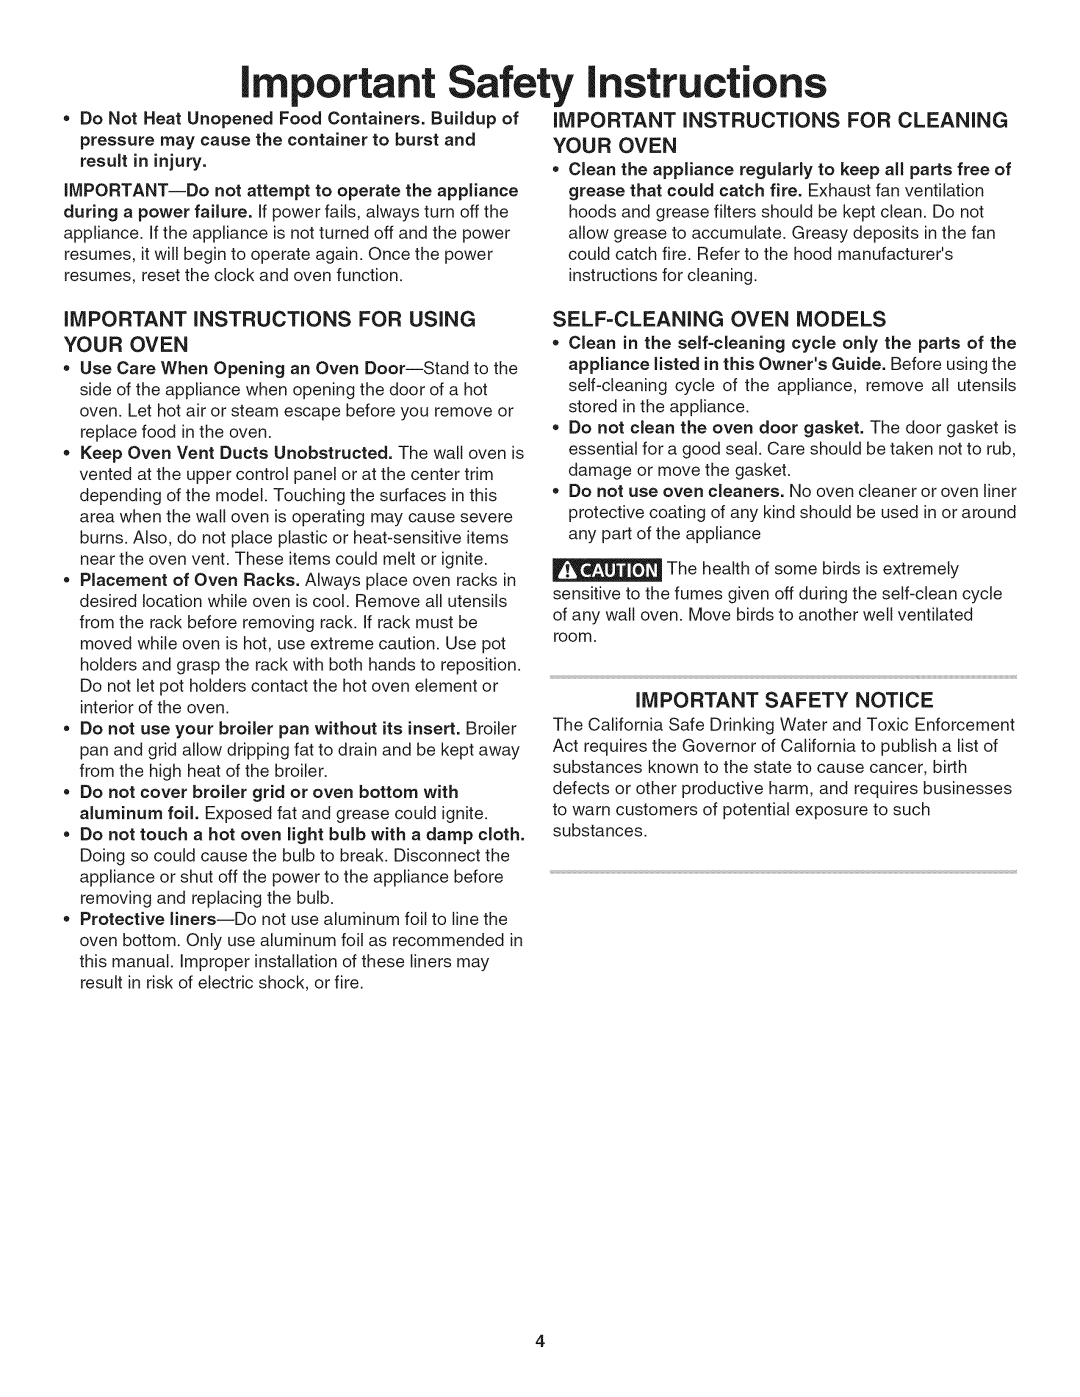 Kenmore 790. 4045 important Safety instructions, iMPORTANT iNSTRUCTiONS FOR CLEANING YOUR OVEN, Self-Cleaningoven Models 